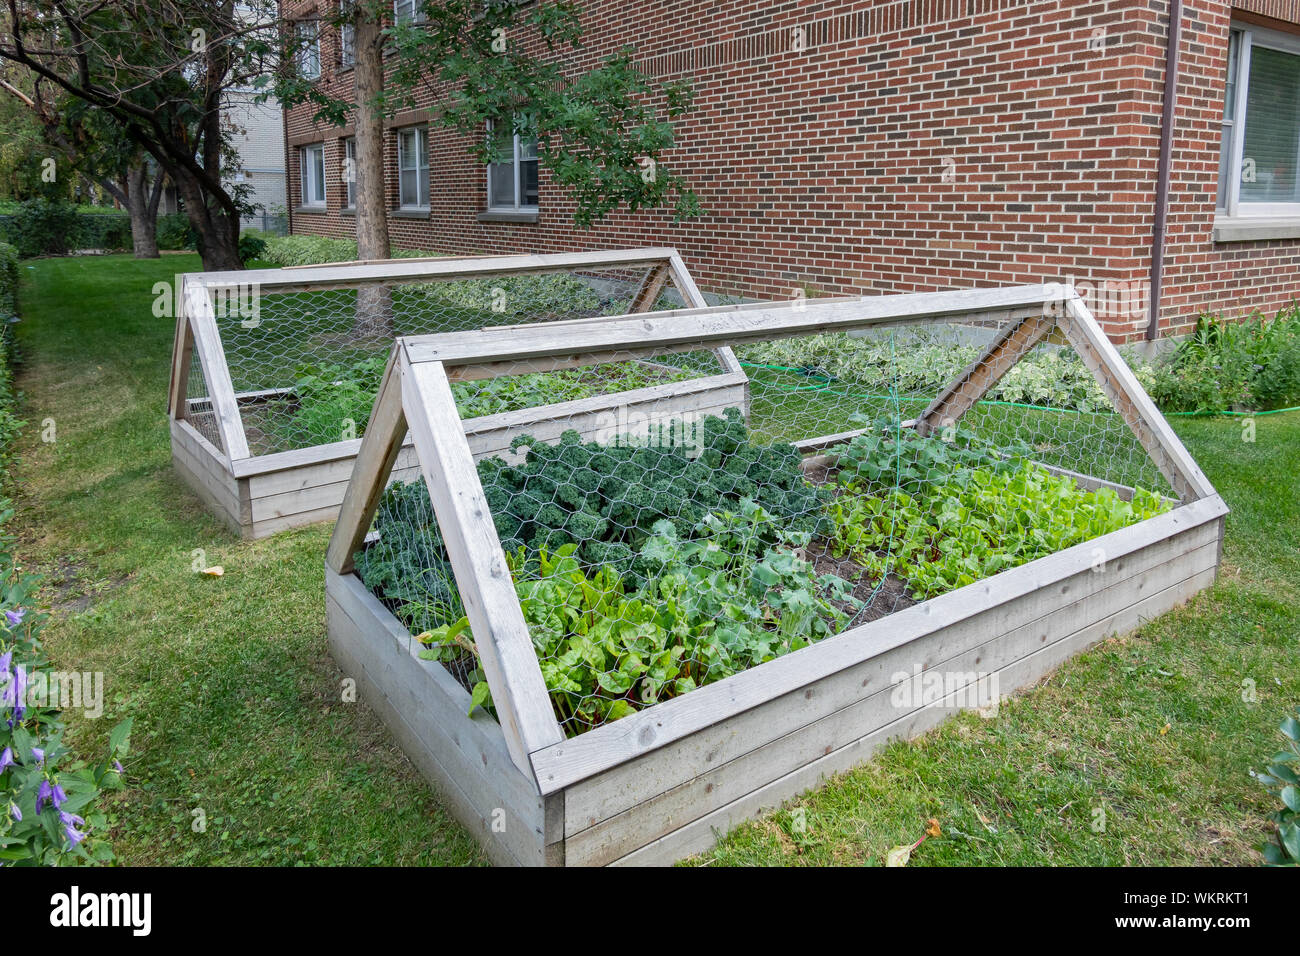 Morning view of a backyard garden cage with vegetable growing inside at Calgary, Canada Stock Photo